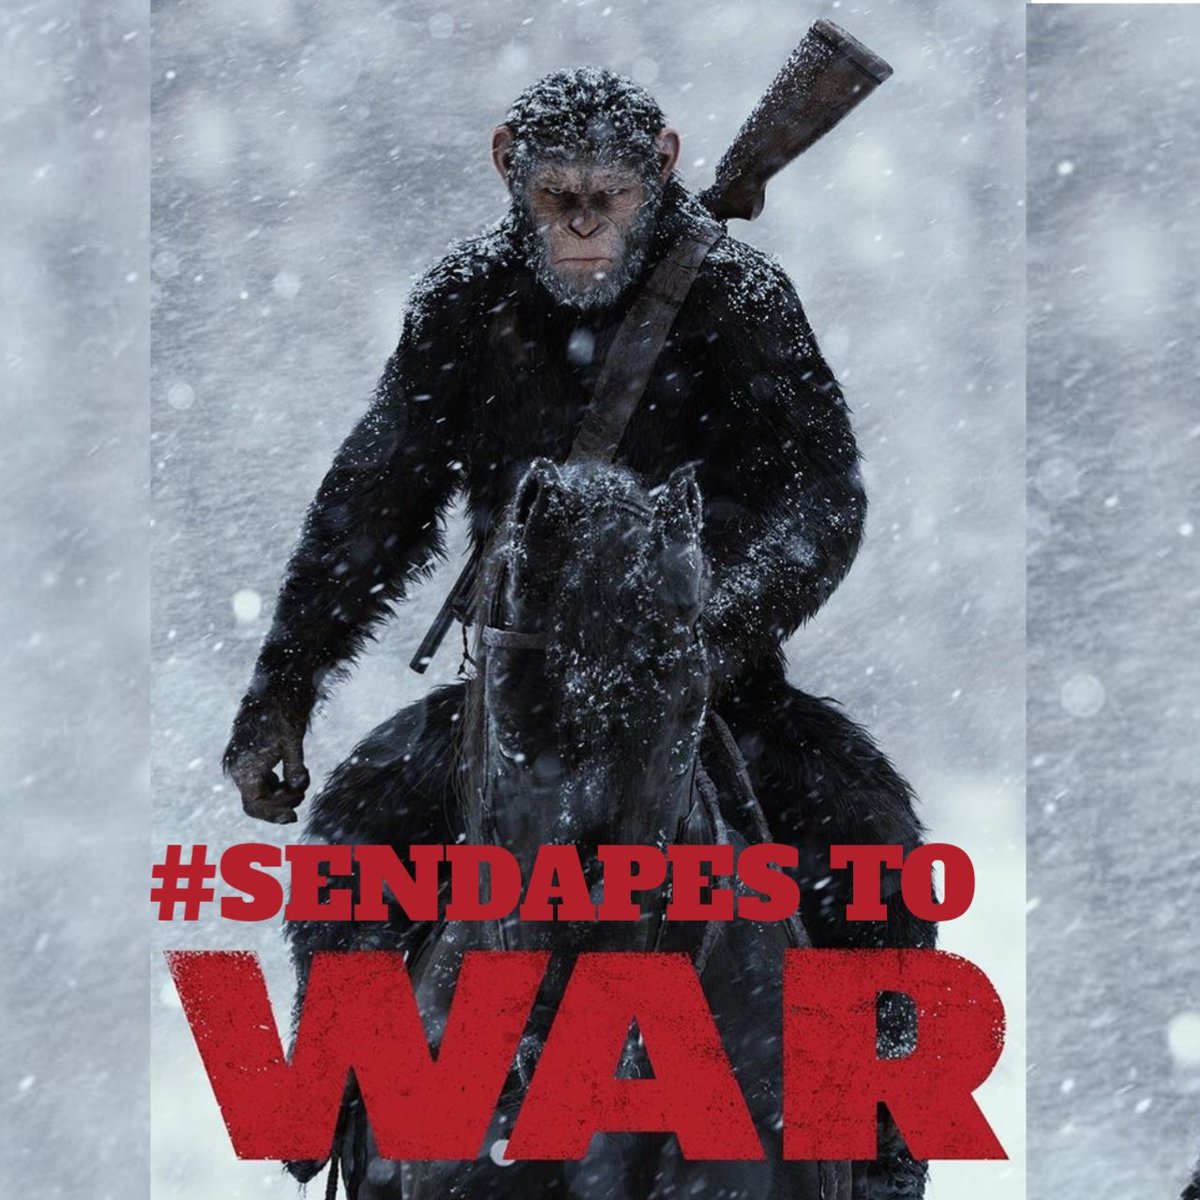 Gm Apes @runes_terminal @peddy2612 

You ready to send the APES to war in the land Rune?
Let's get it going because the Apes are here to conquer 

#SENDAPES  #SENDAPES #SENDAPES #SENDAPES  #SENDAPES #SENDAPES
#SENDAPES  #SENDAPES #SENDAPES
#SENDAPES  #SENDAPES #SENDAPES